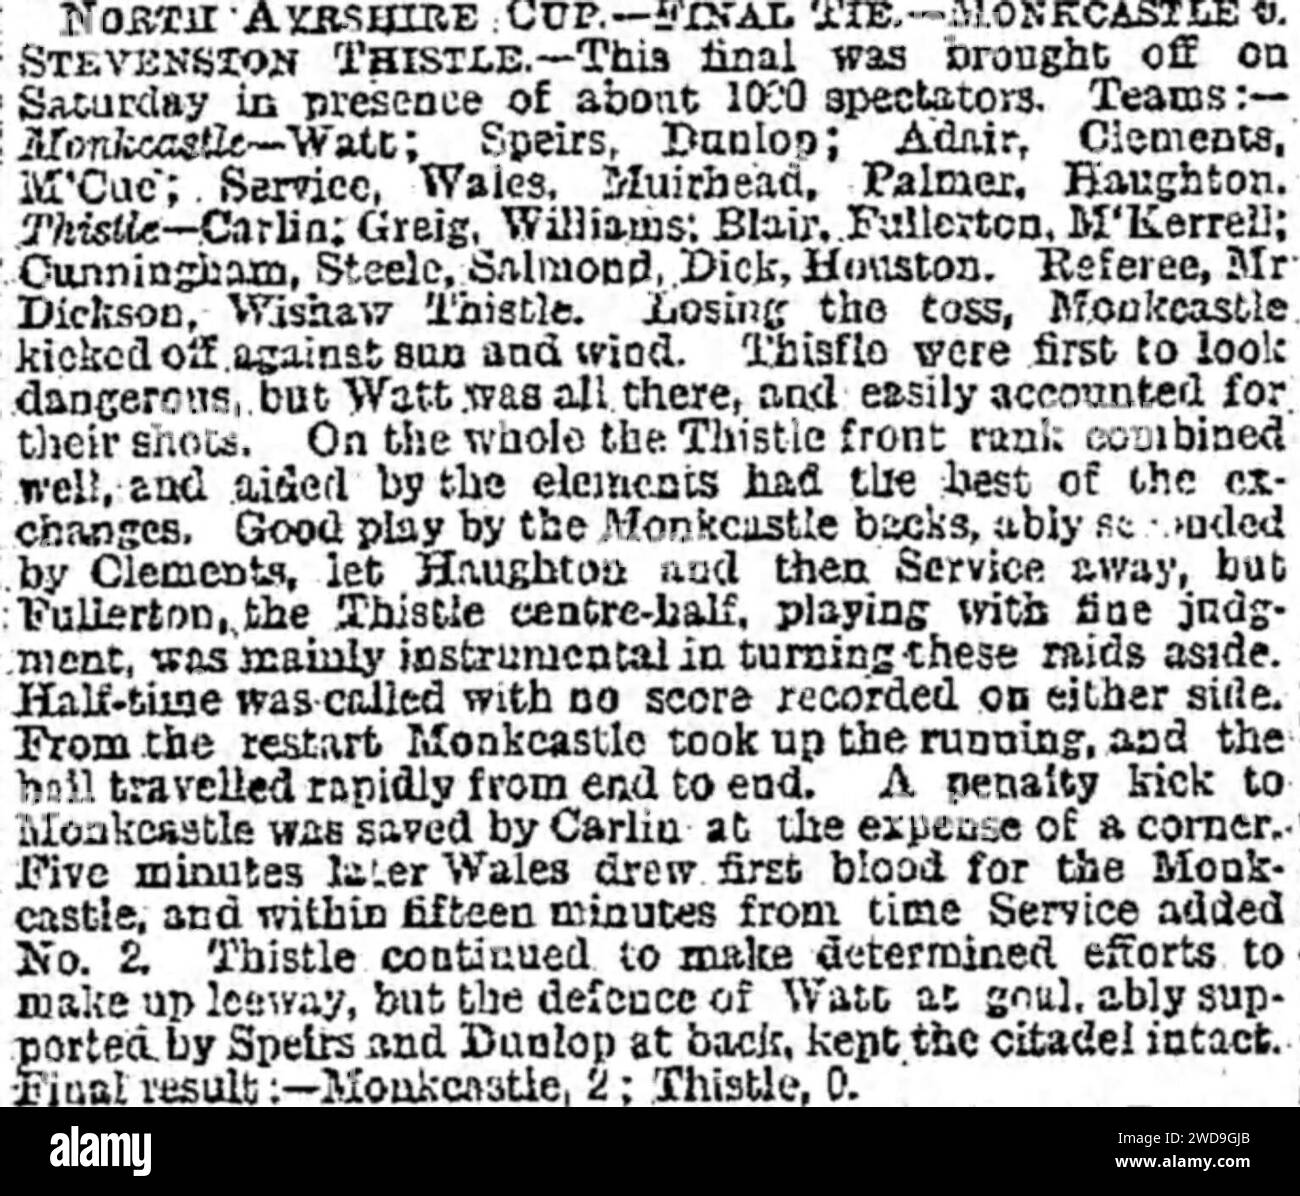 1896–97 North Ayrshire Cup Final, Monkcastle 2–0 Stevenston Thistle, Glasgow Herald, 17 May 1897. Stock Photo